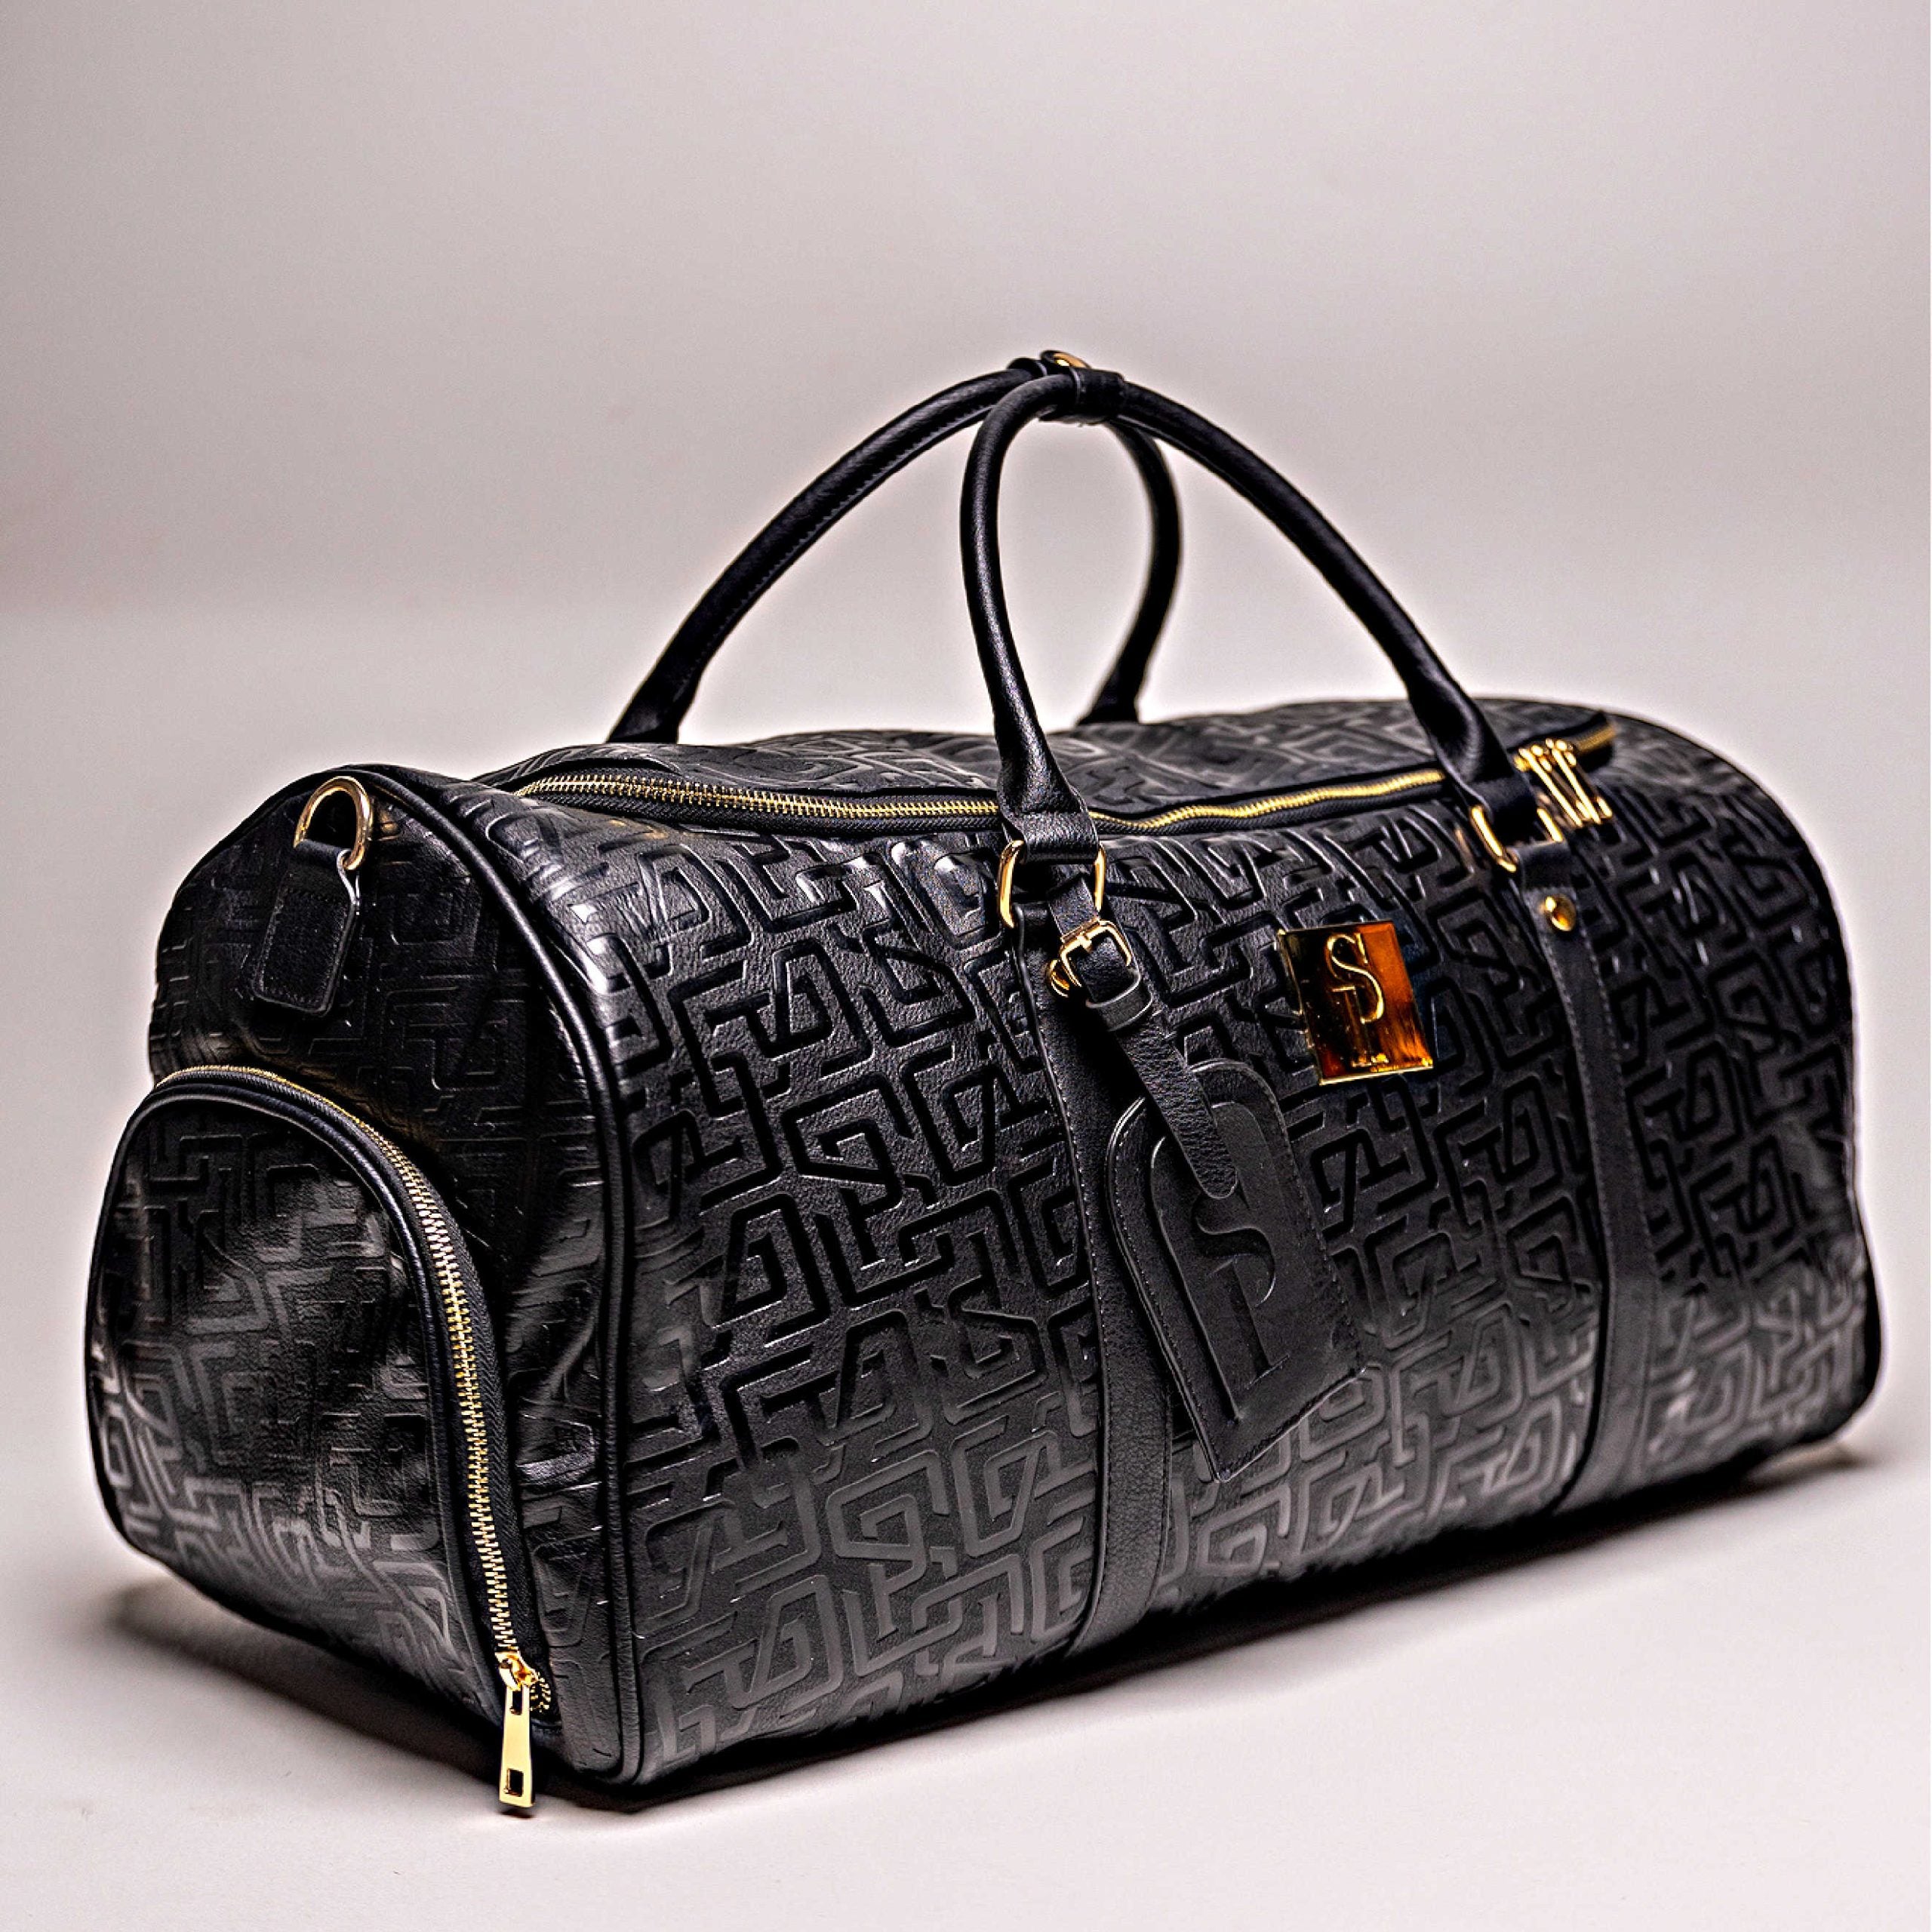 Kith Duffle Bag with Monogram Deboss in Saffiano Leather - Black